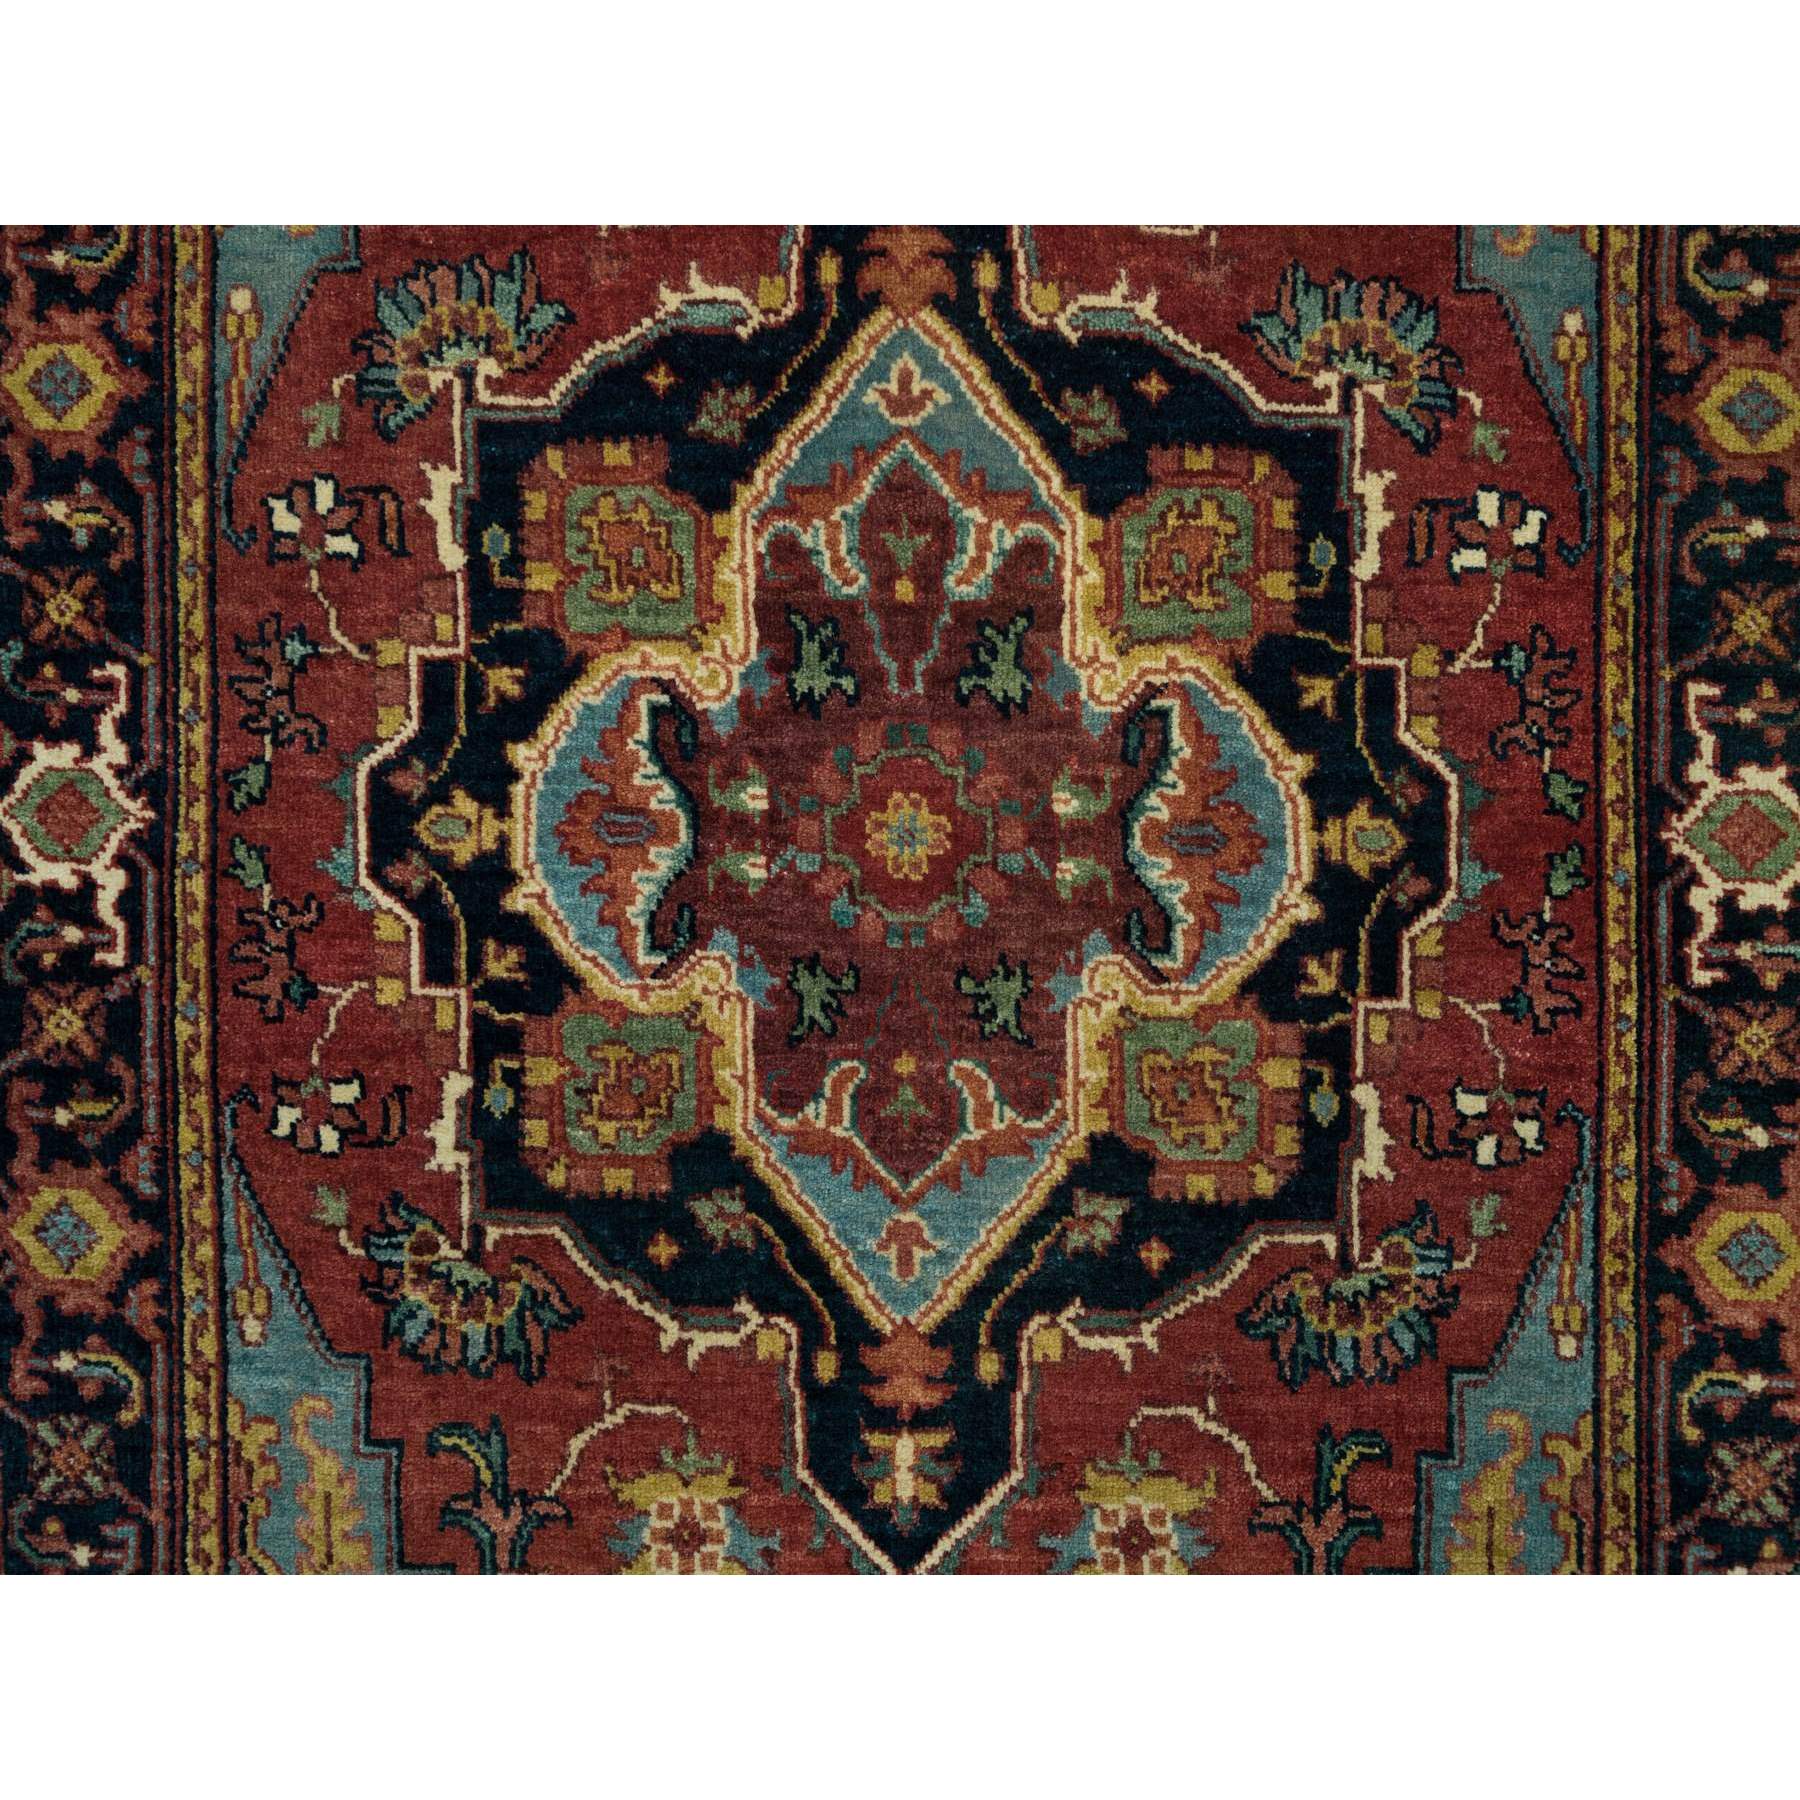 3'2"x5'2" Garnet Red, Hand Woven Antiqued Fine Heriz Re-Creation, Natural Dyes Densely Woven, Natural Wool, Plush Pile, Oriental Rug 